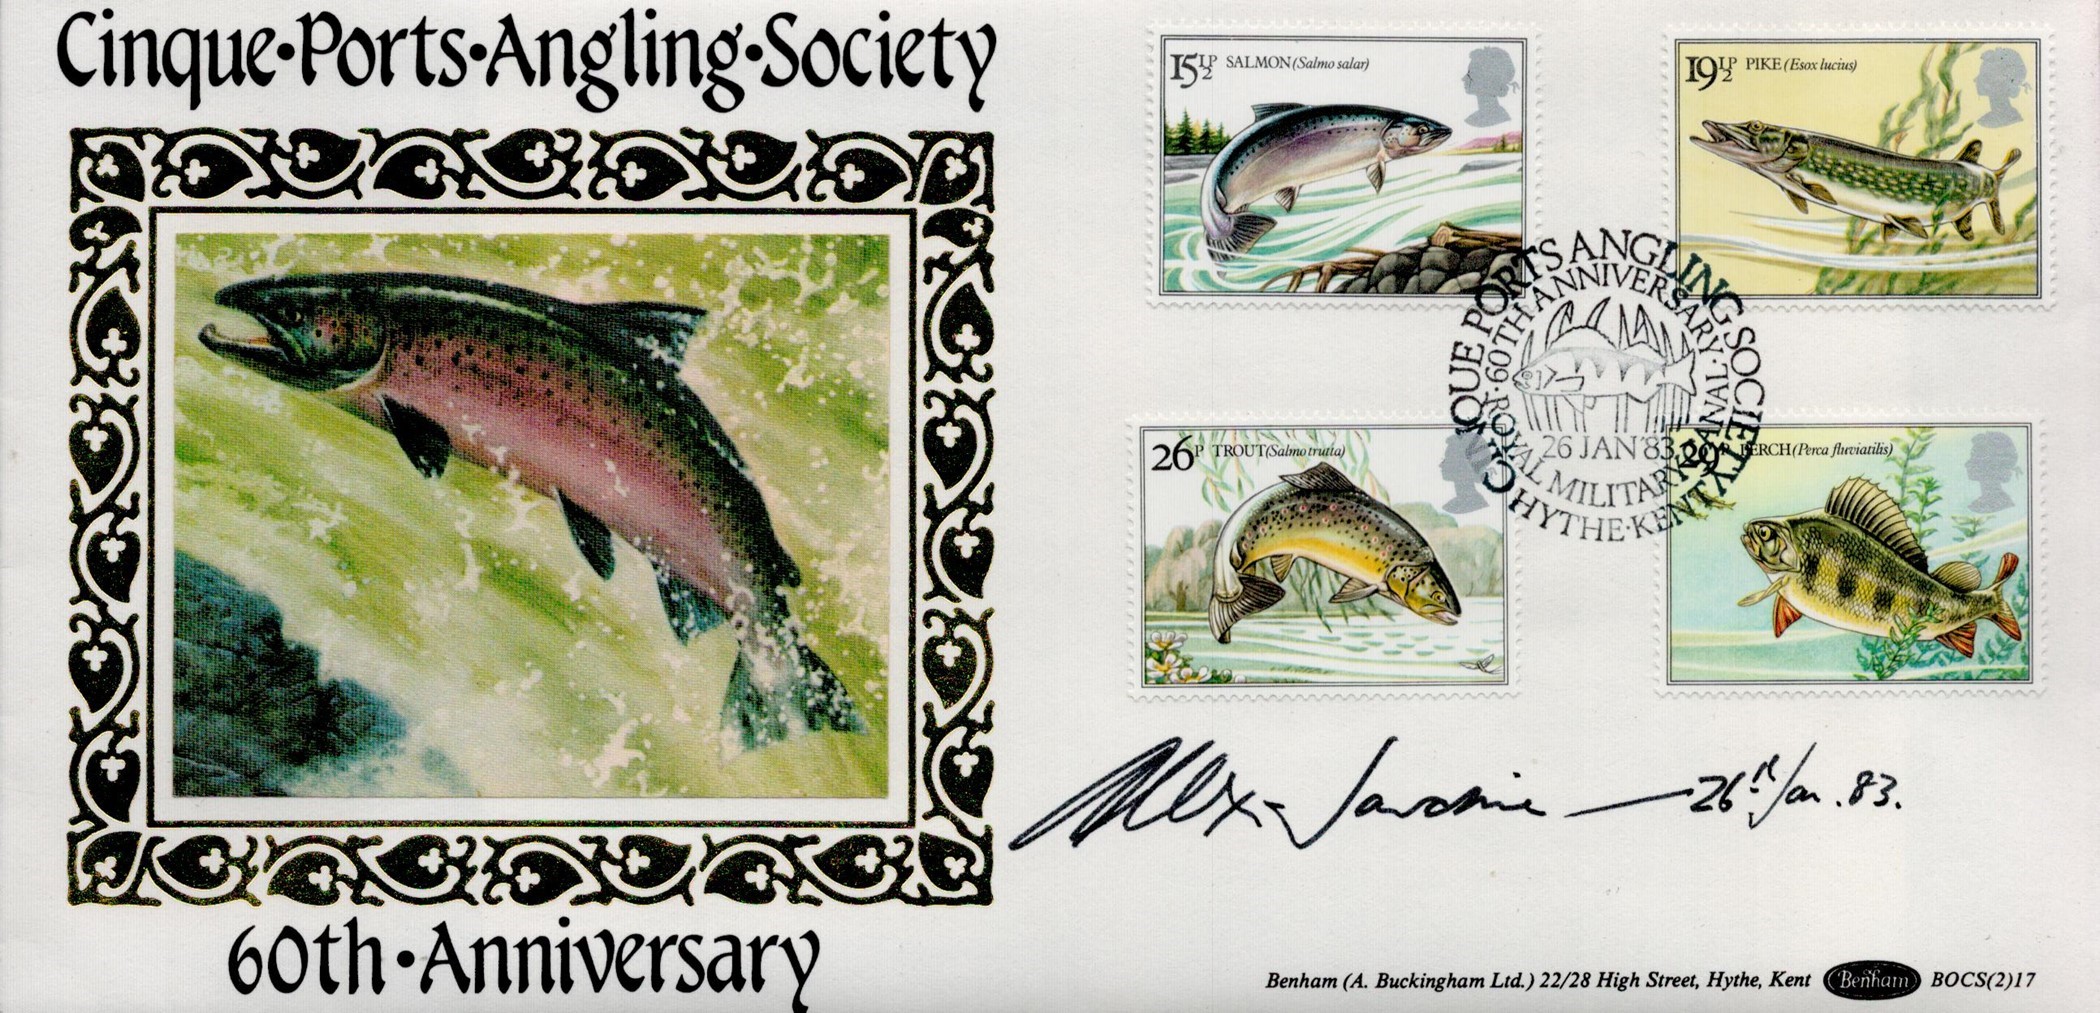 Alex Jardine signed FDC. Cinque. Port. Angling. Society 60th Anniversary Single postmarked 26 Jan 83